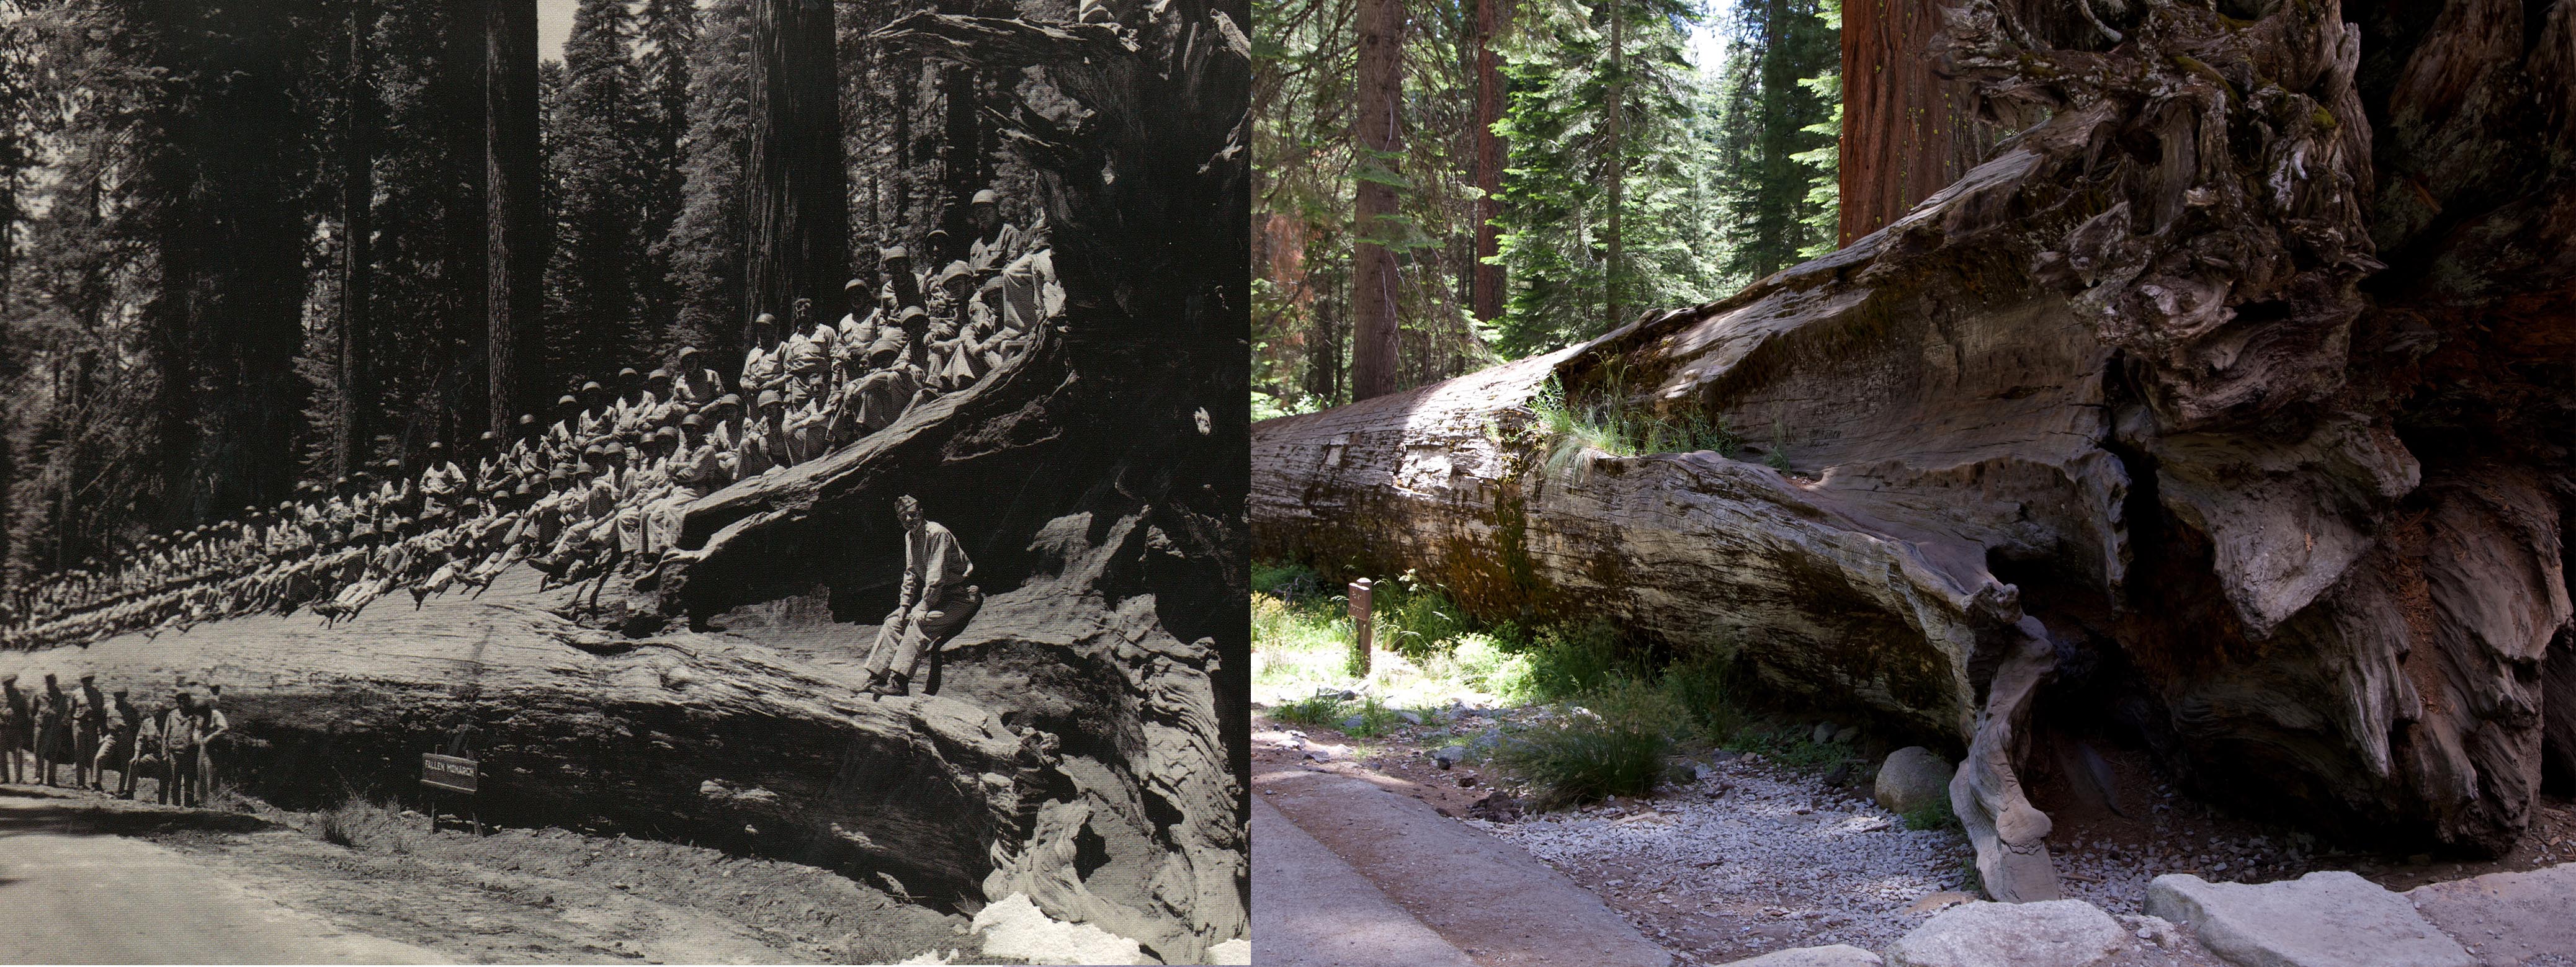 0630 yosemite fallen monarch before and after